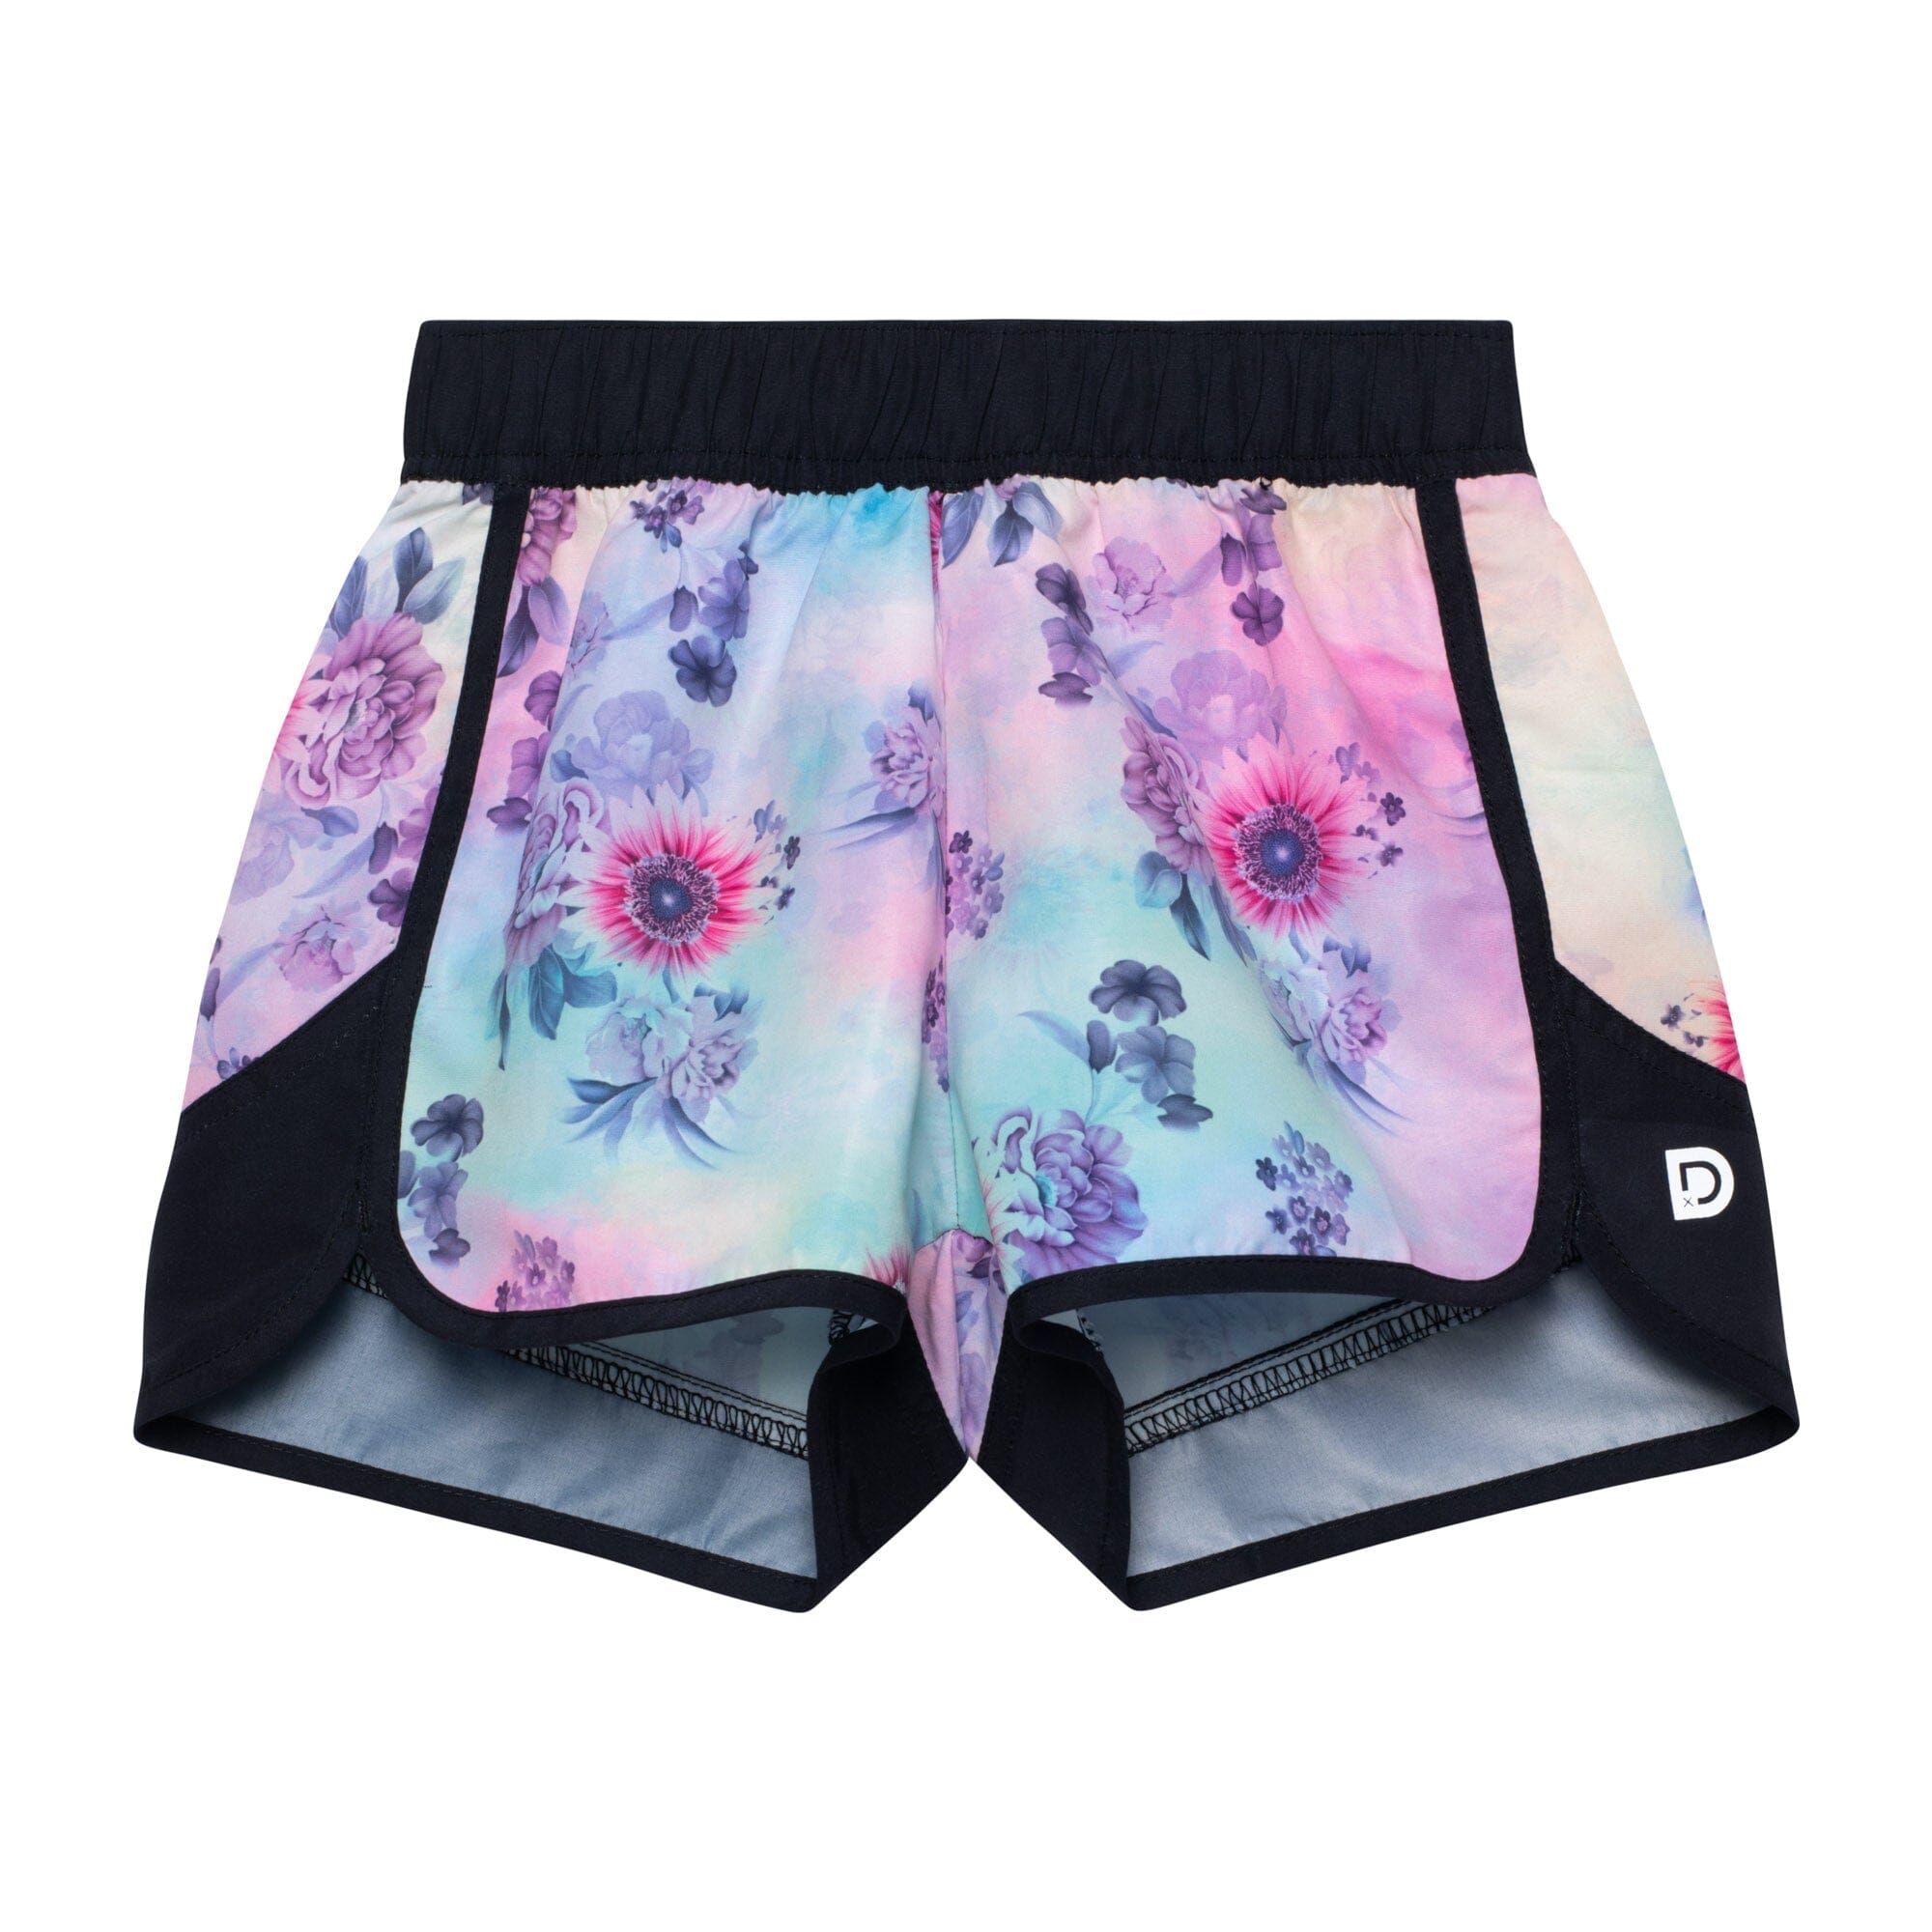 Printed Athletic Short Multicolor Flowers - E30X25_088